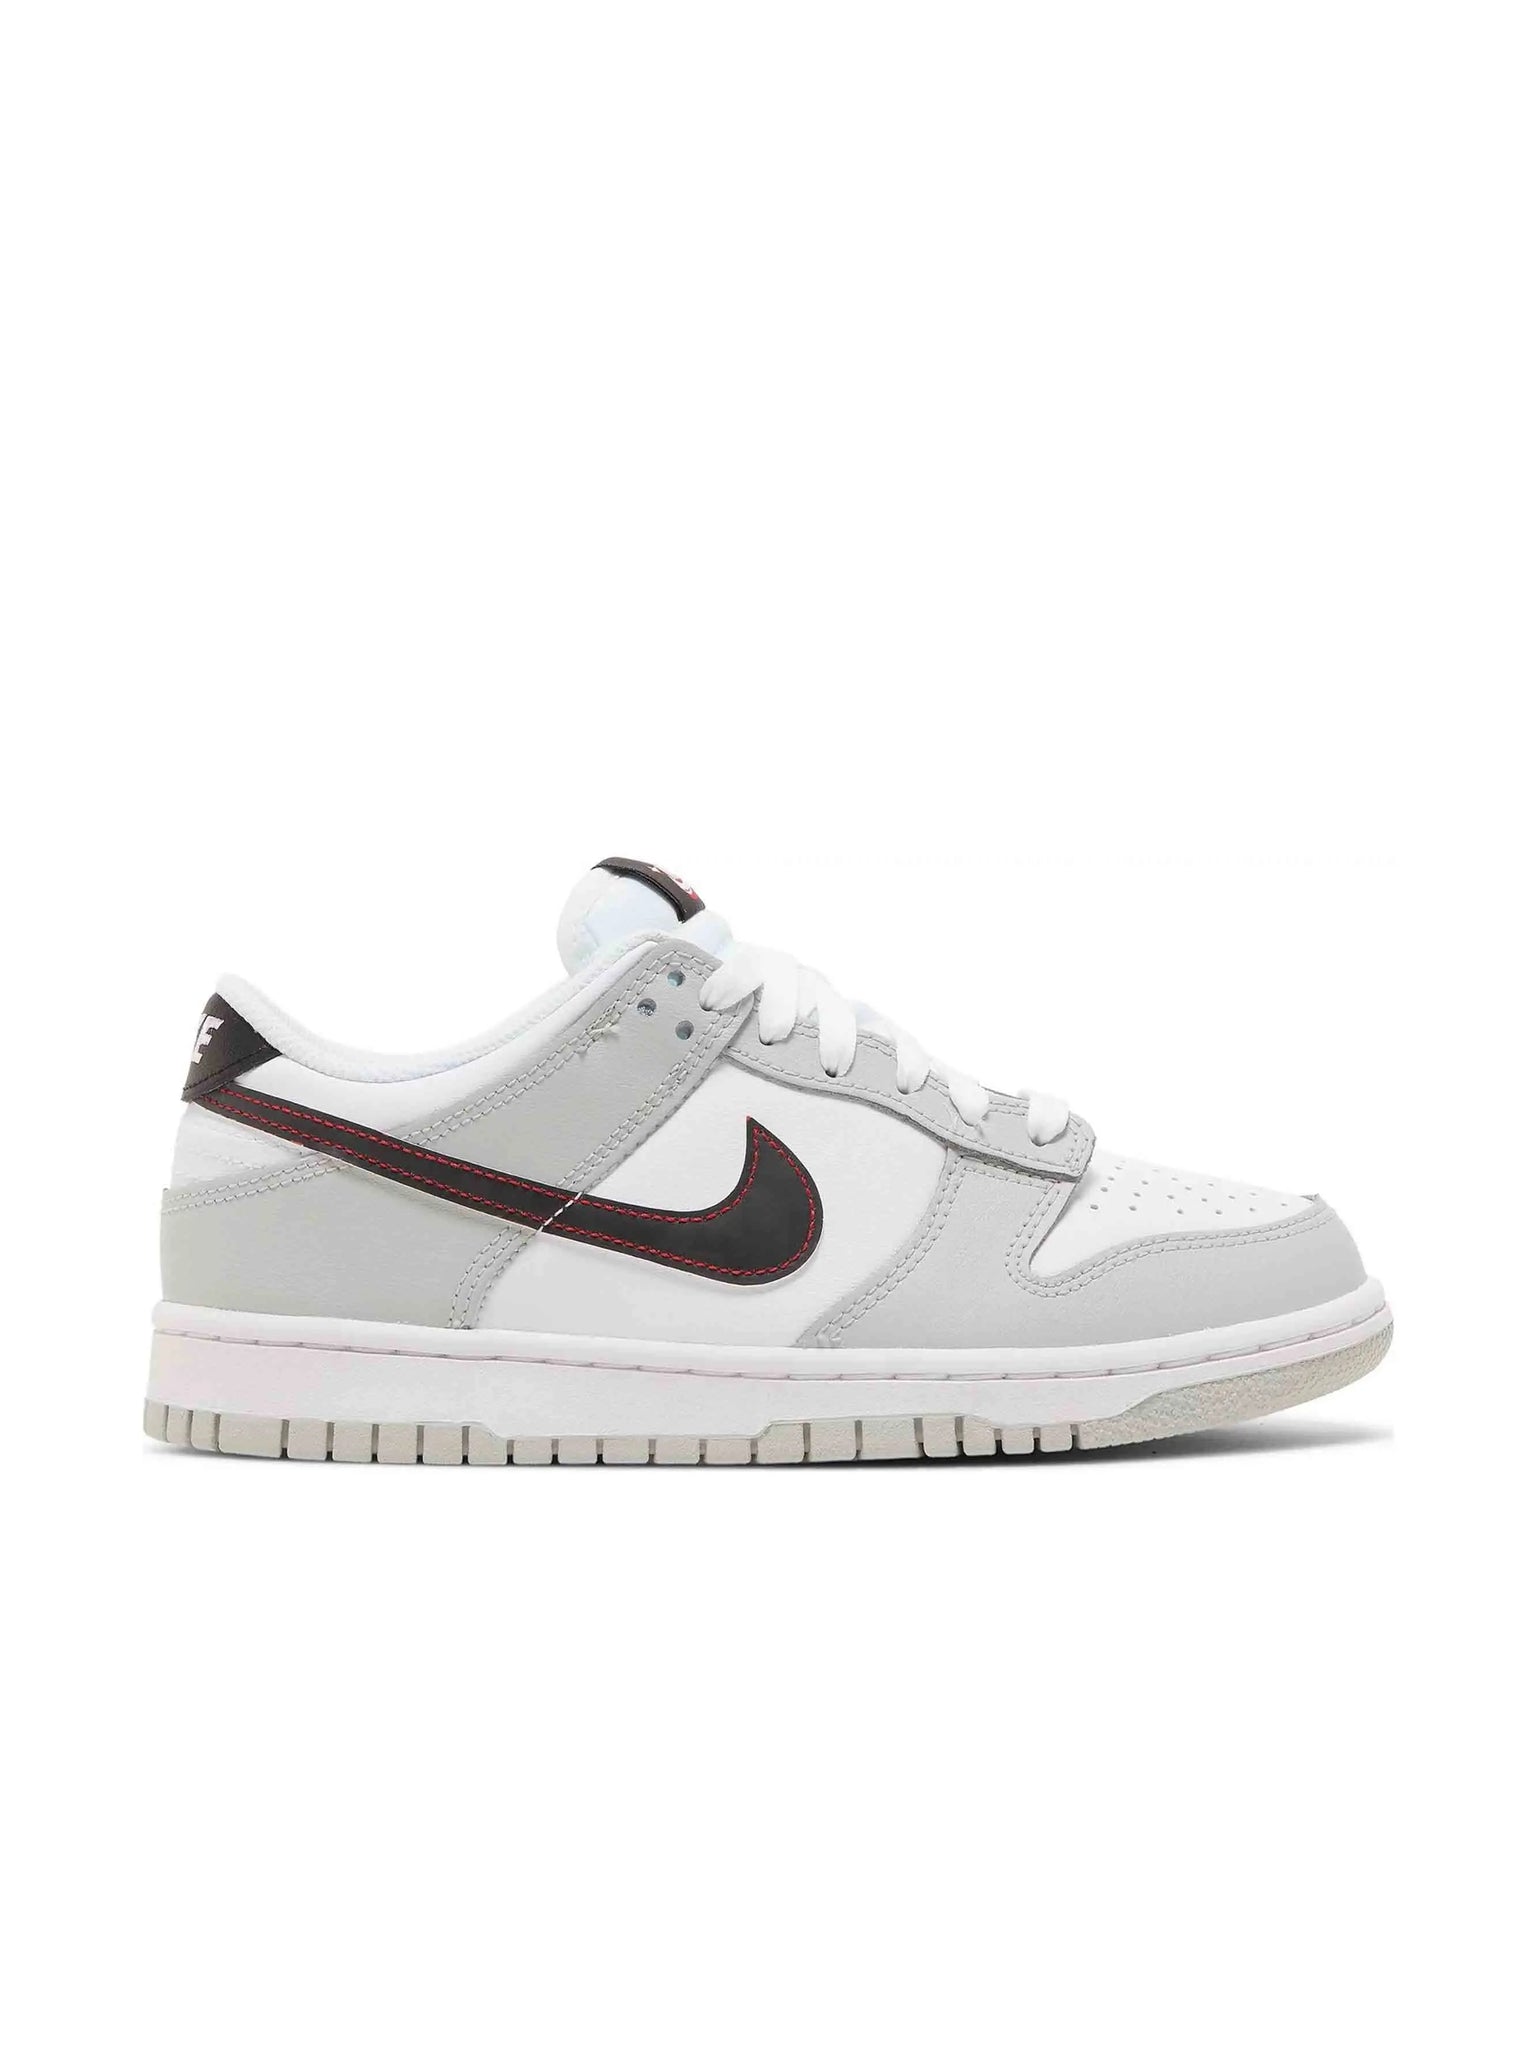 Nike Dunk Low SE Lottery Pack Grey Fog (GS) Prior